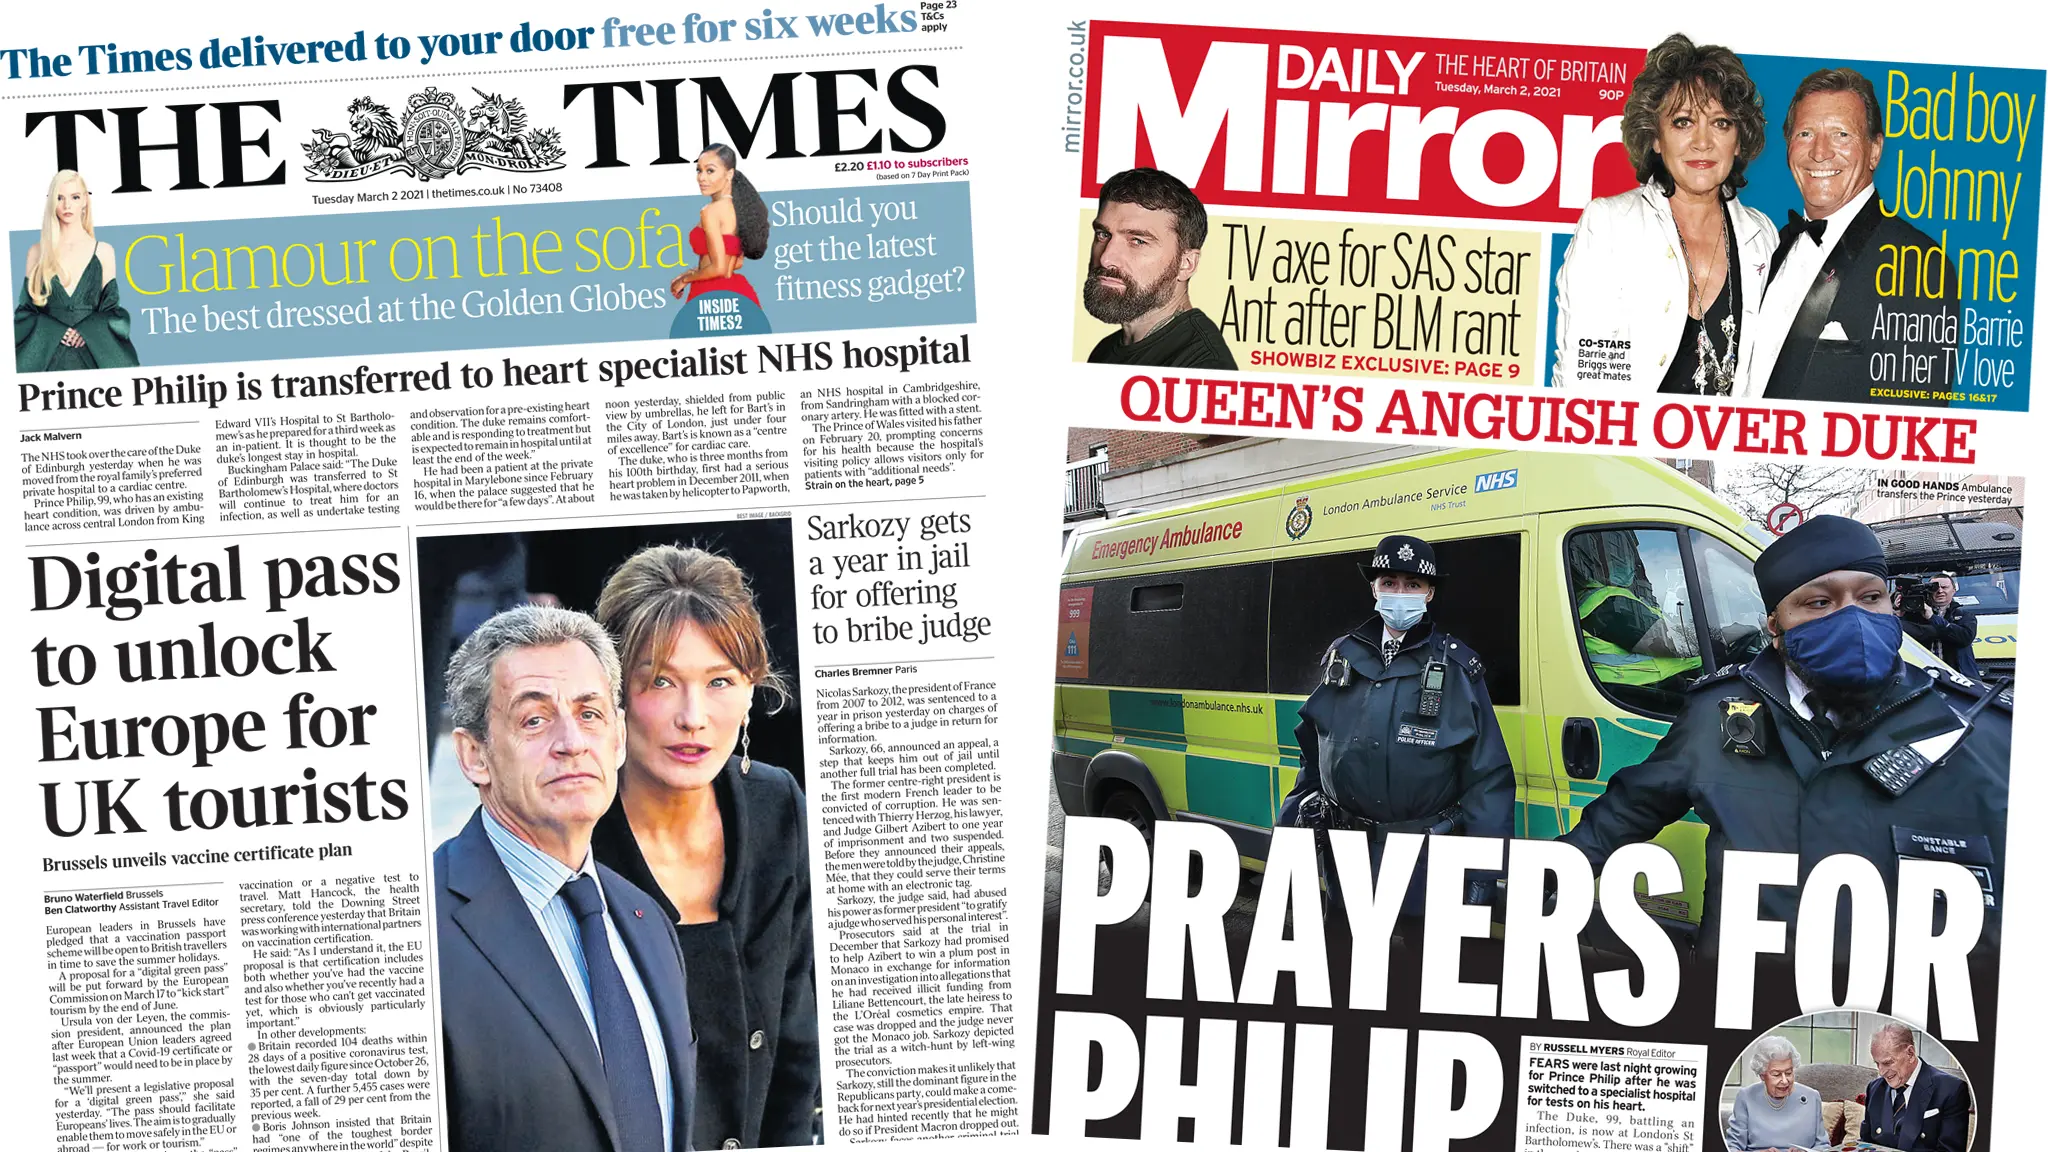 Times and Daily Mirror front pages